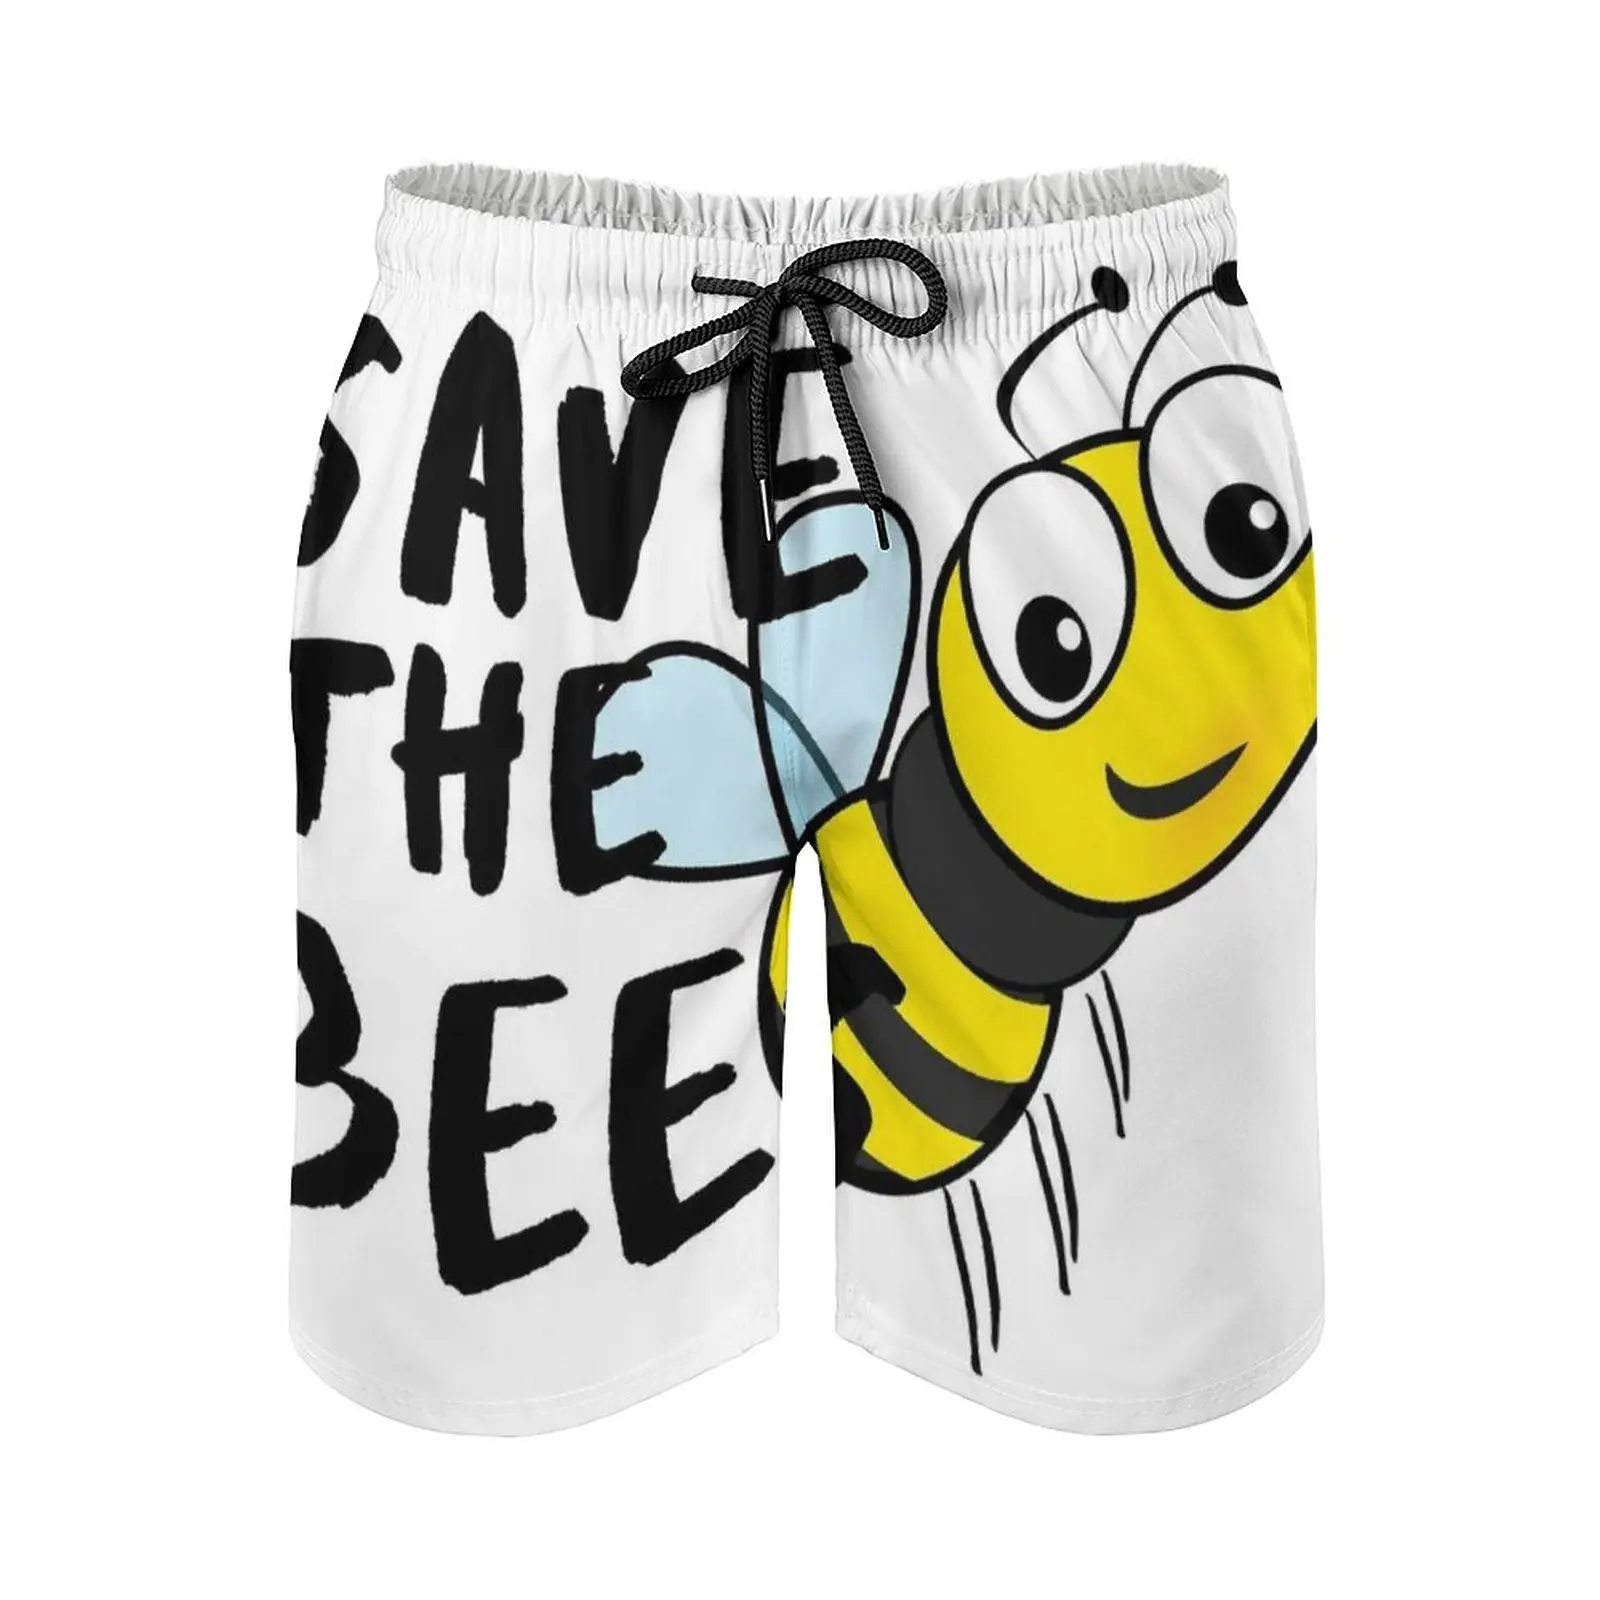 

Save The Bees! Sweet Bee Vegan Gift Idea Men's Sports Short Beach Shorts Surfing Swimming Boxer Trunks Bathing Save The Bees